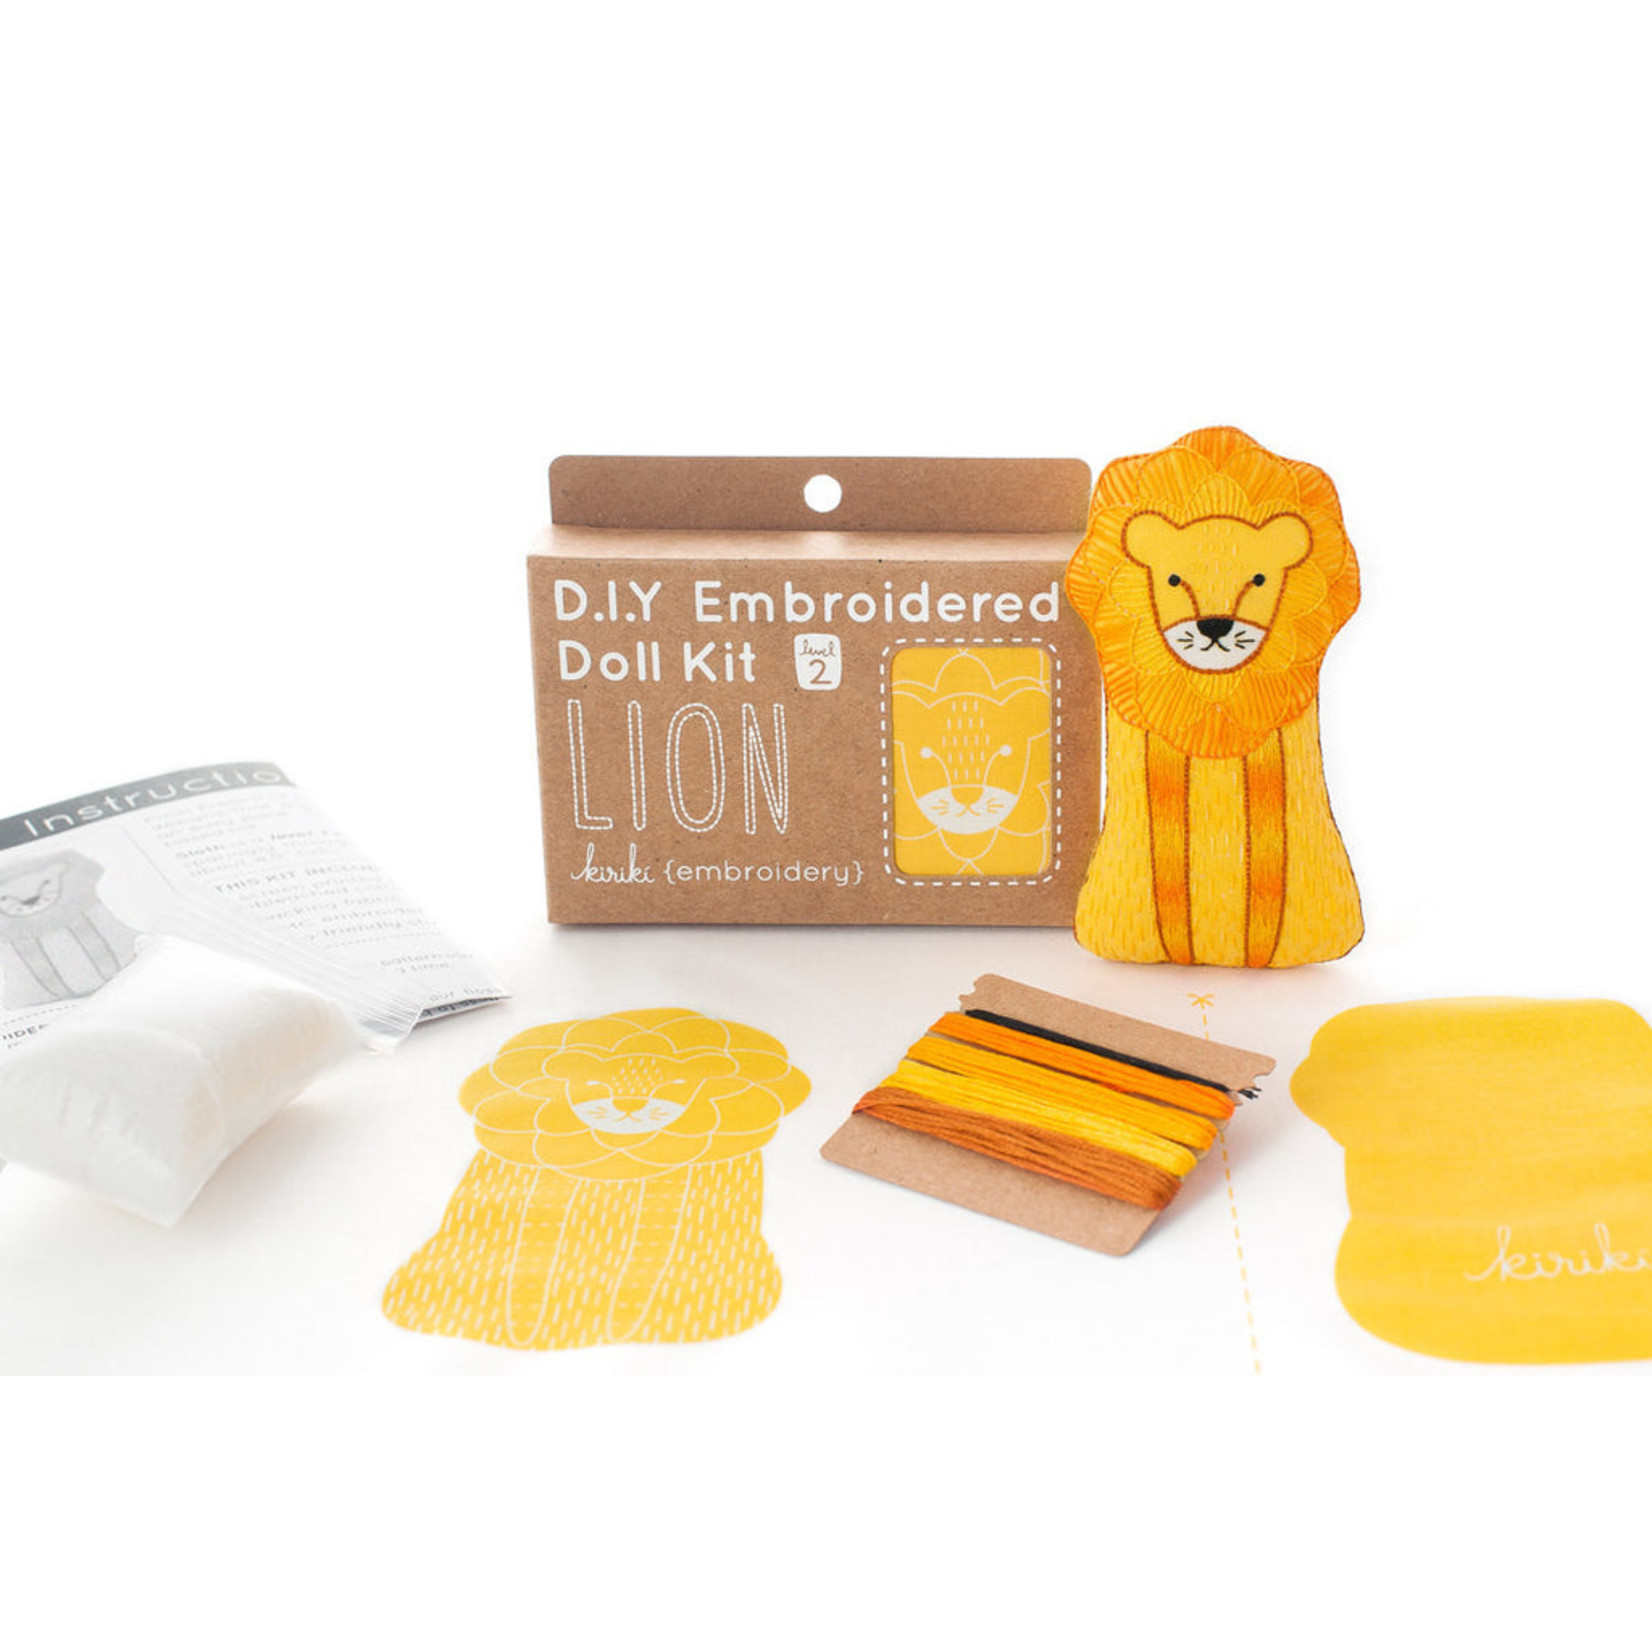 Lion Embroidered Doll Kit - Level 2